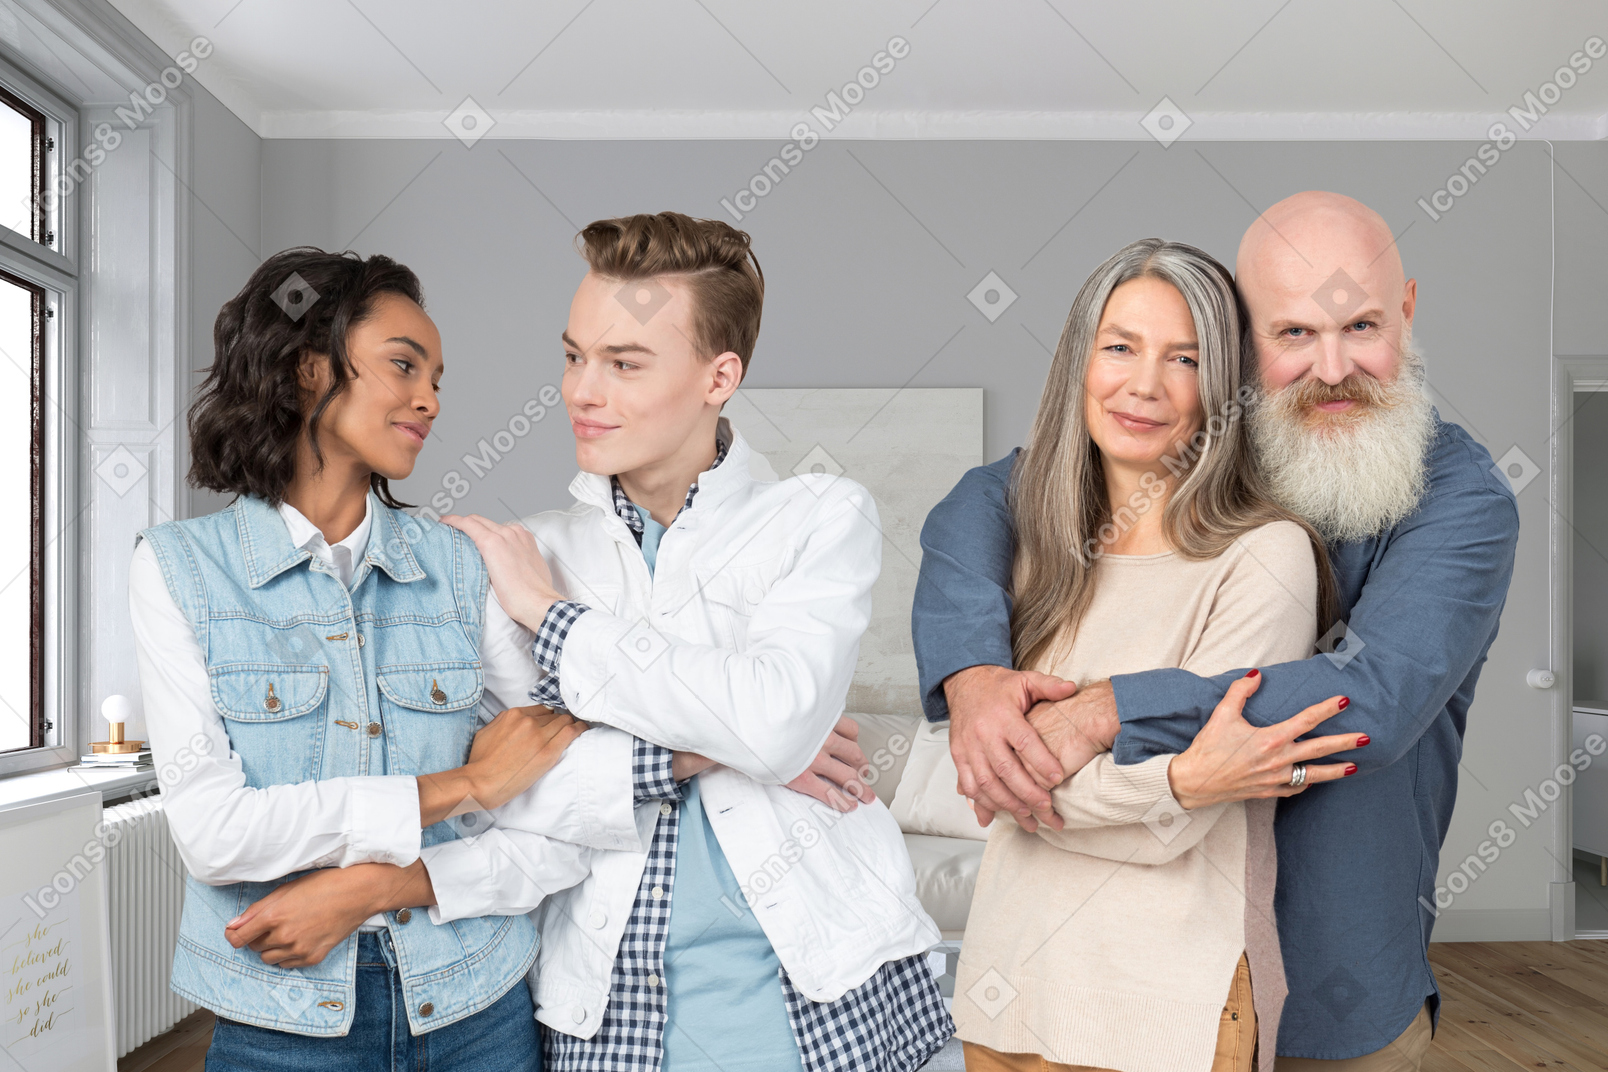 An old couple posing next to a young couple